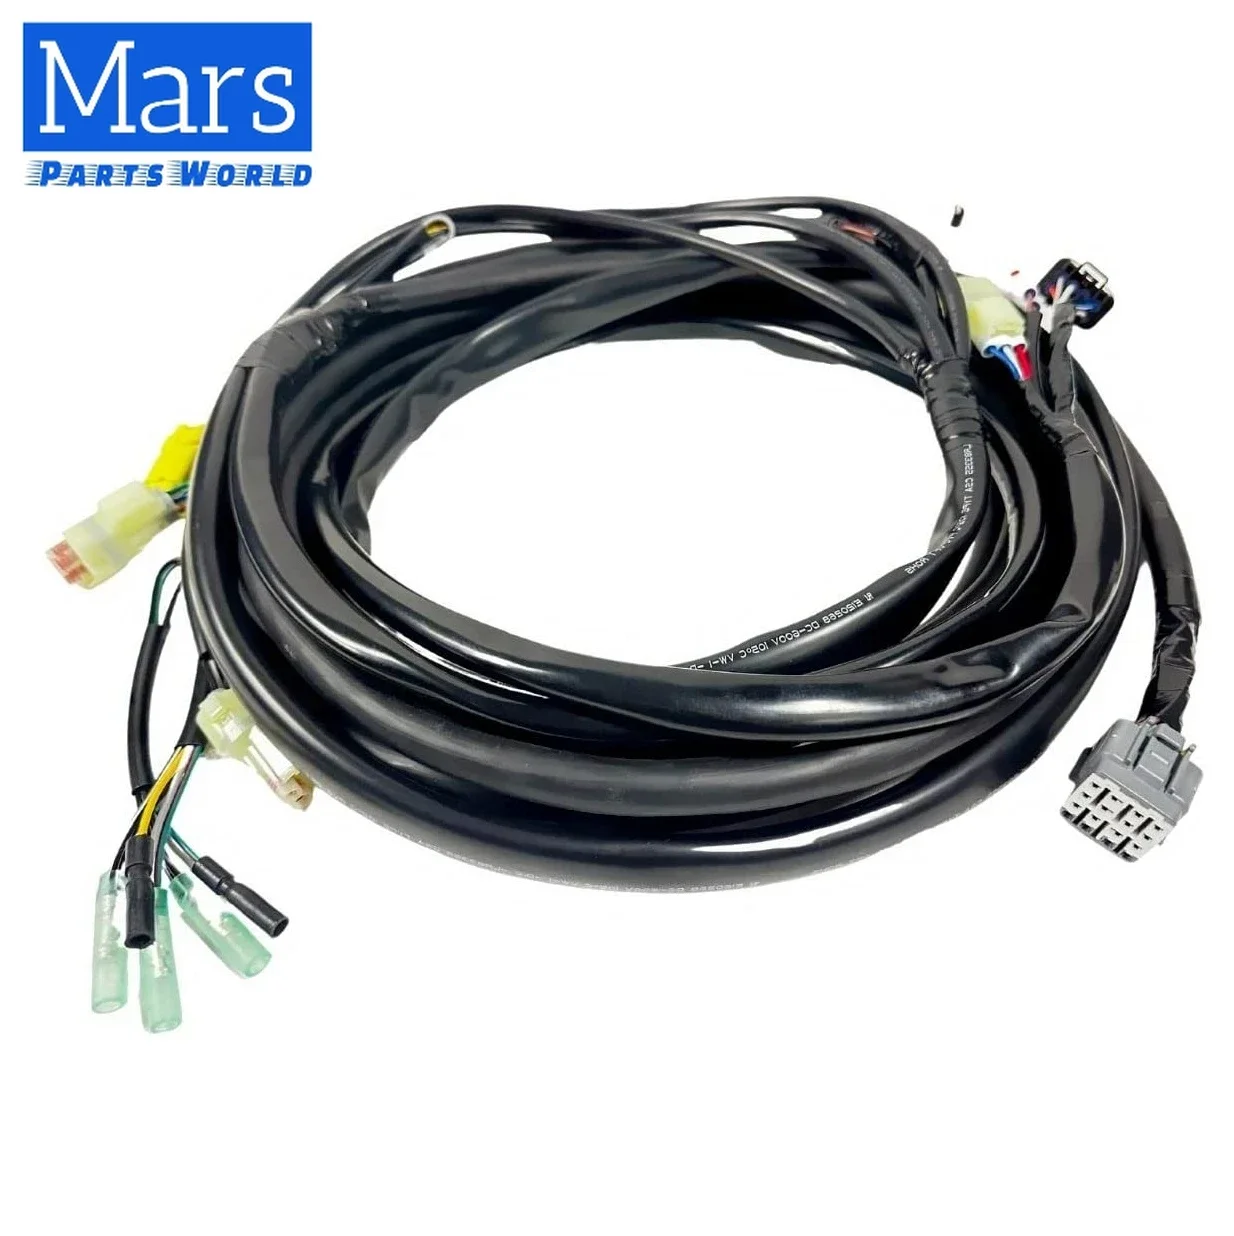 

16ft Main Wiring Harness for Suzuki Outboard Controller Box Wire Harness 36620-93J03